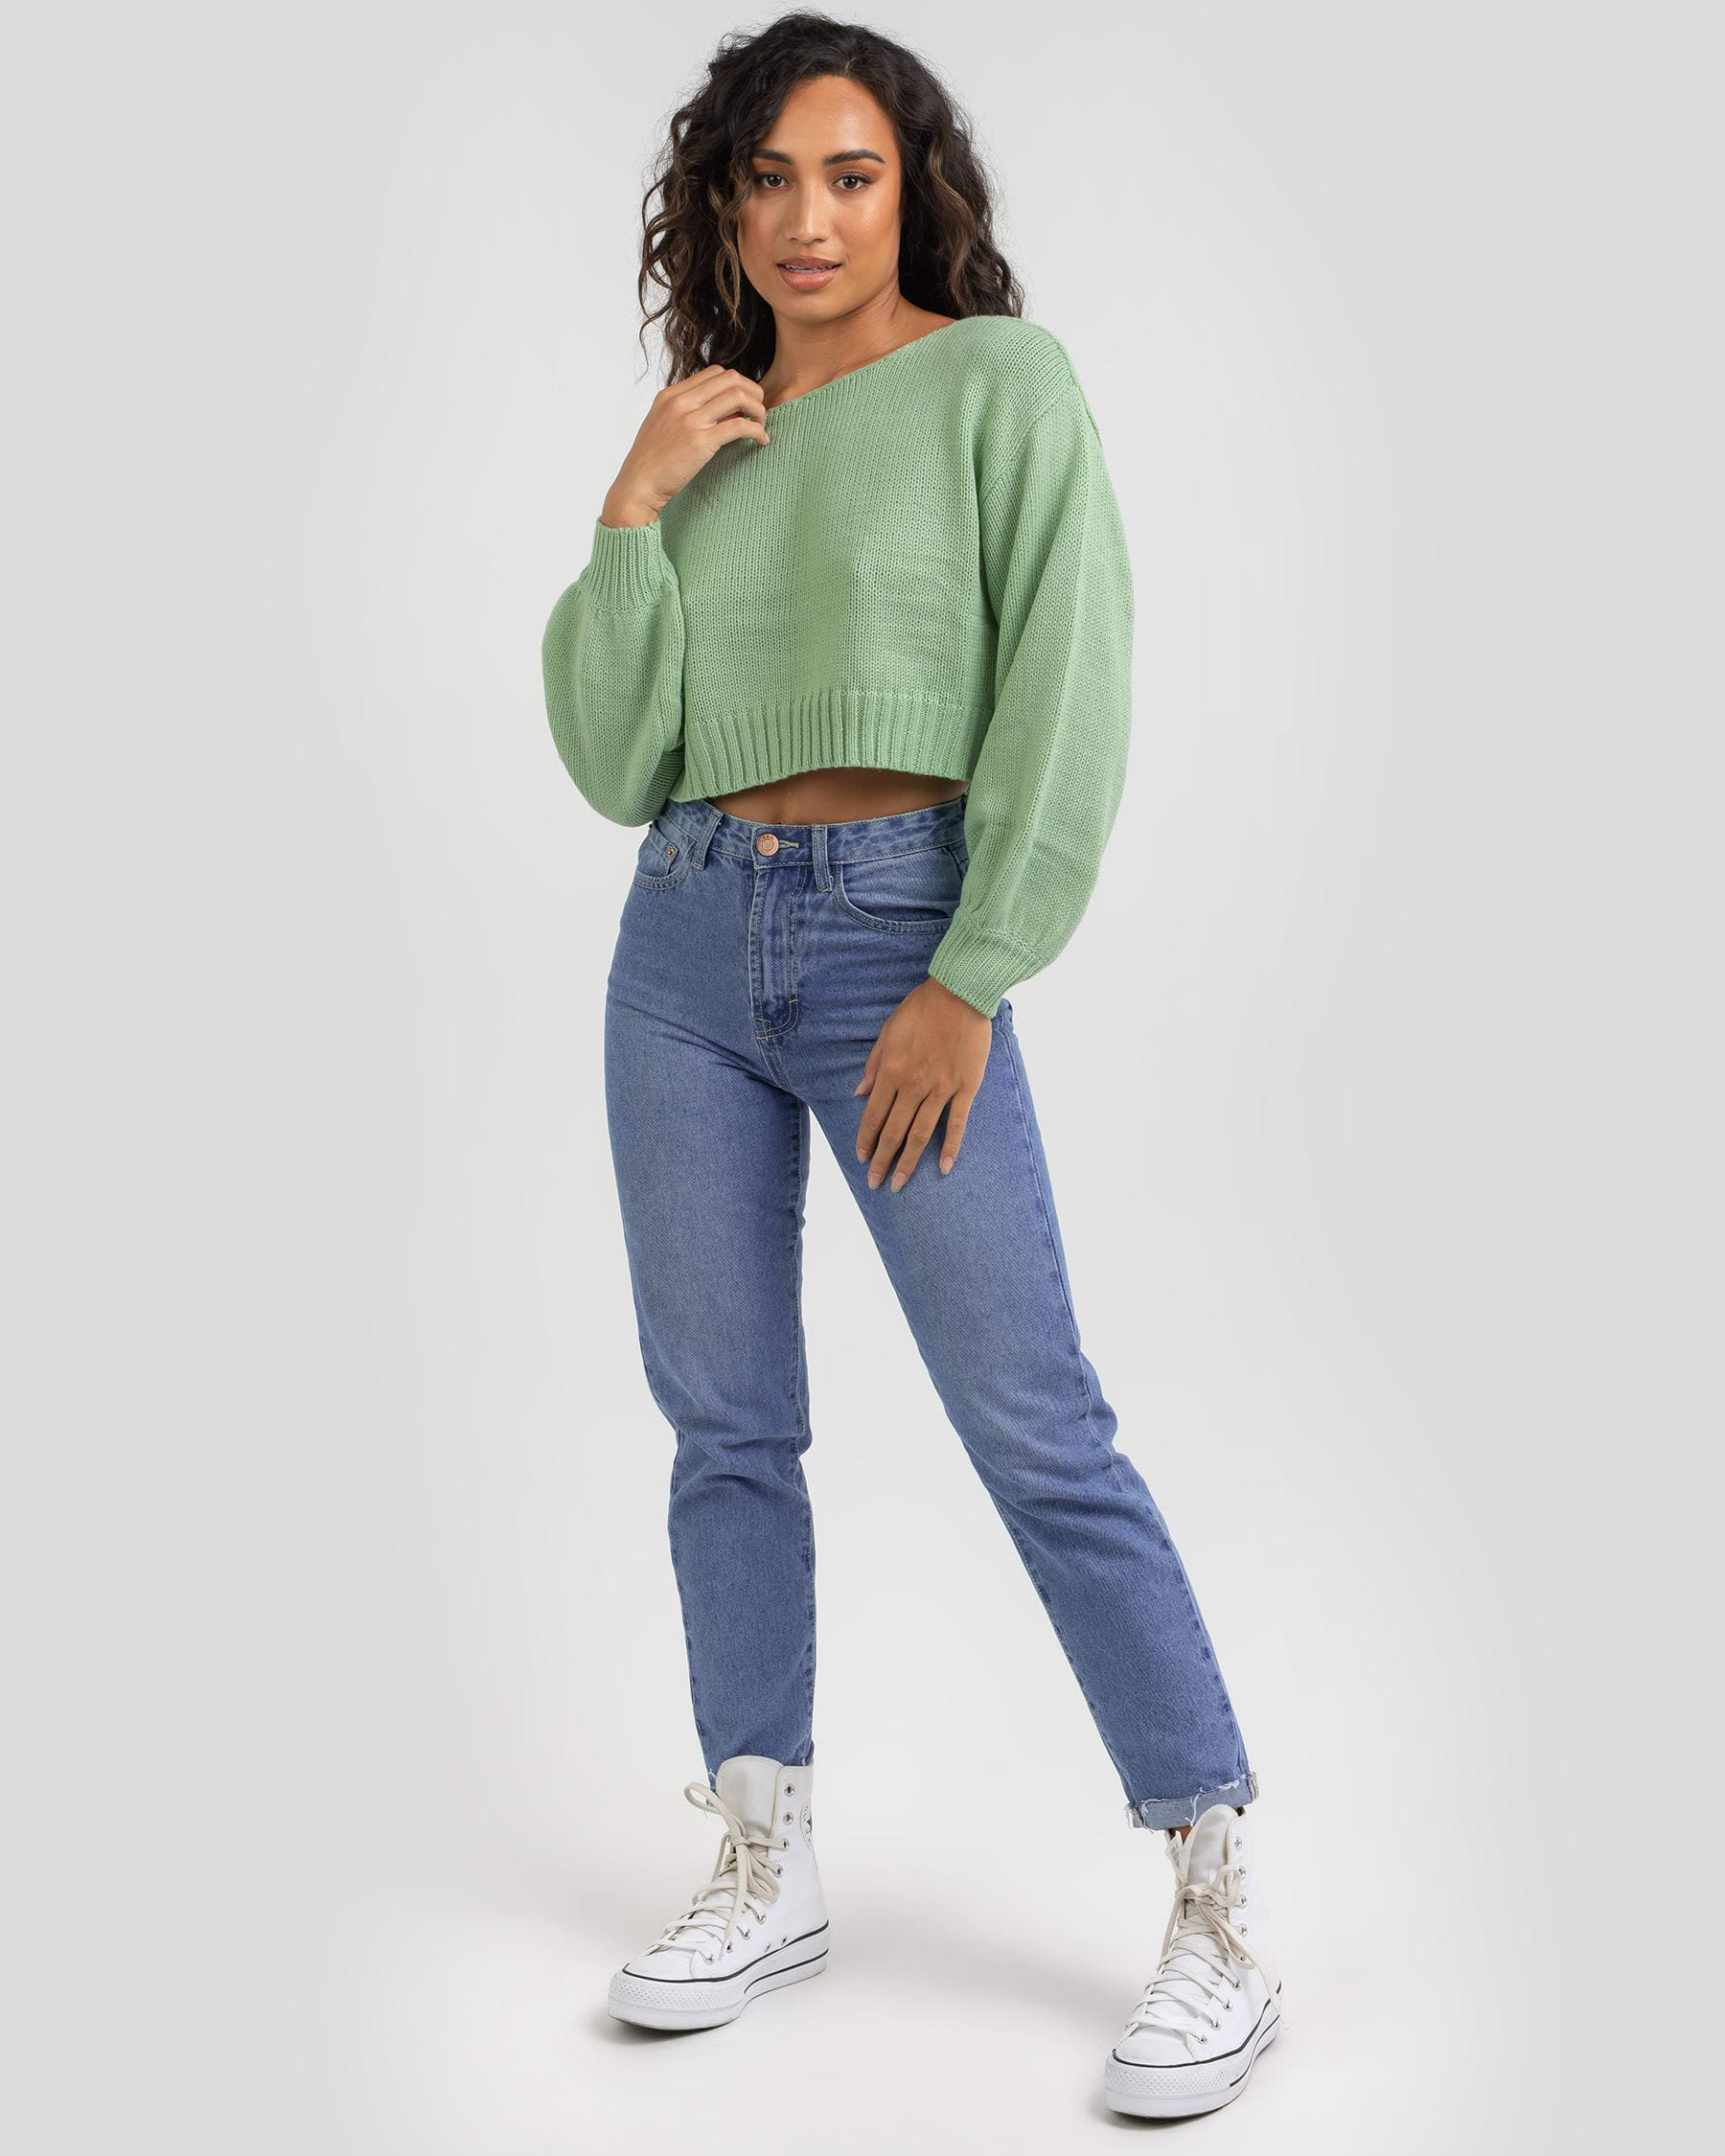 Mooloola Fingal Knit Jumper In Pistachio - Fast Shipping & Easy Returns ...